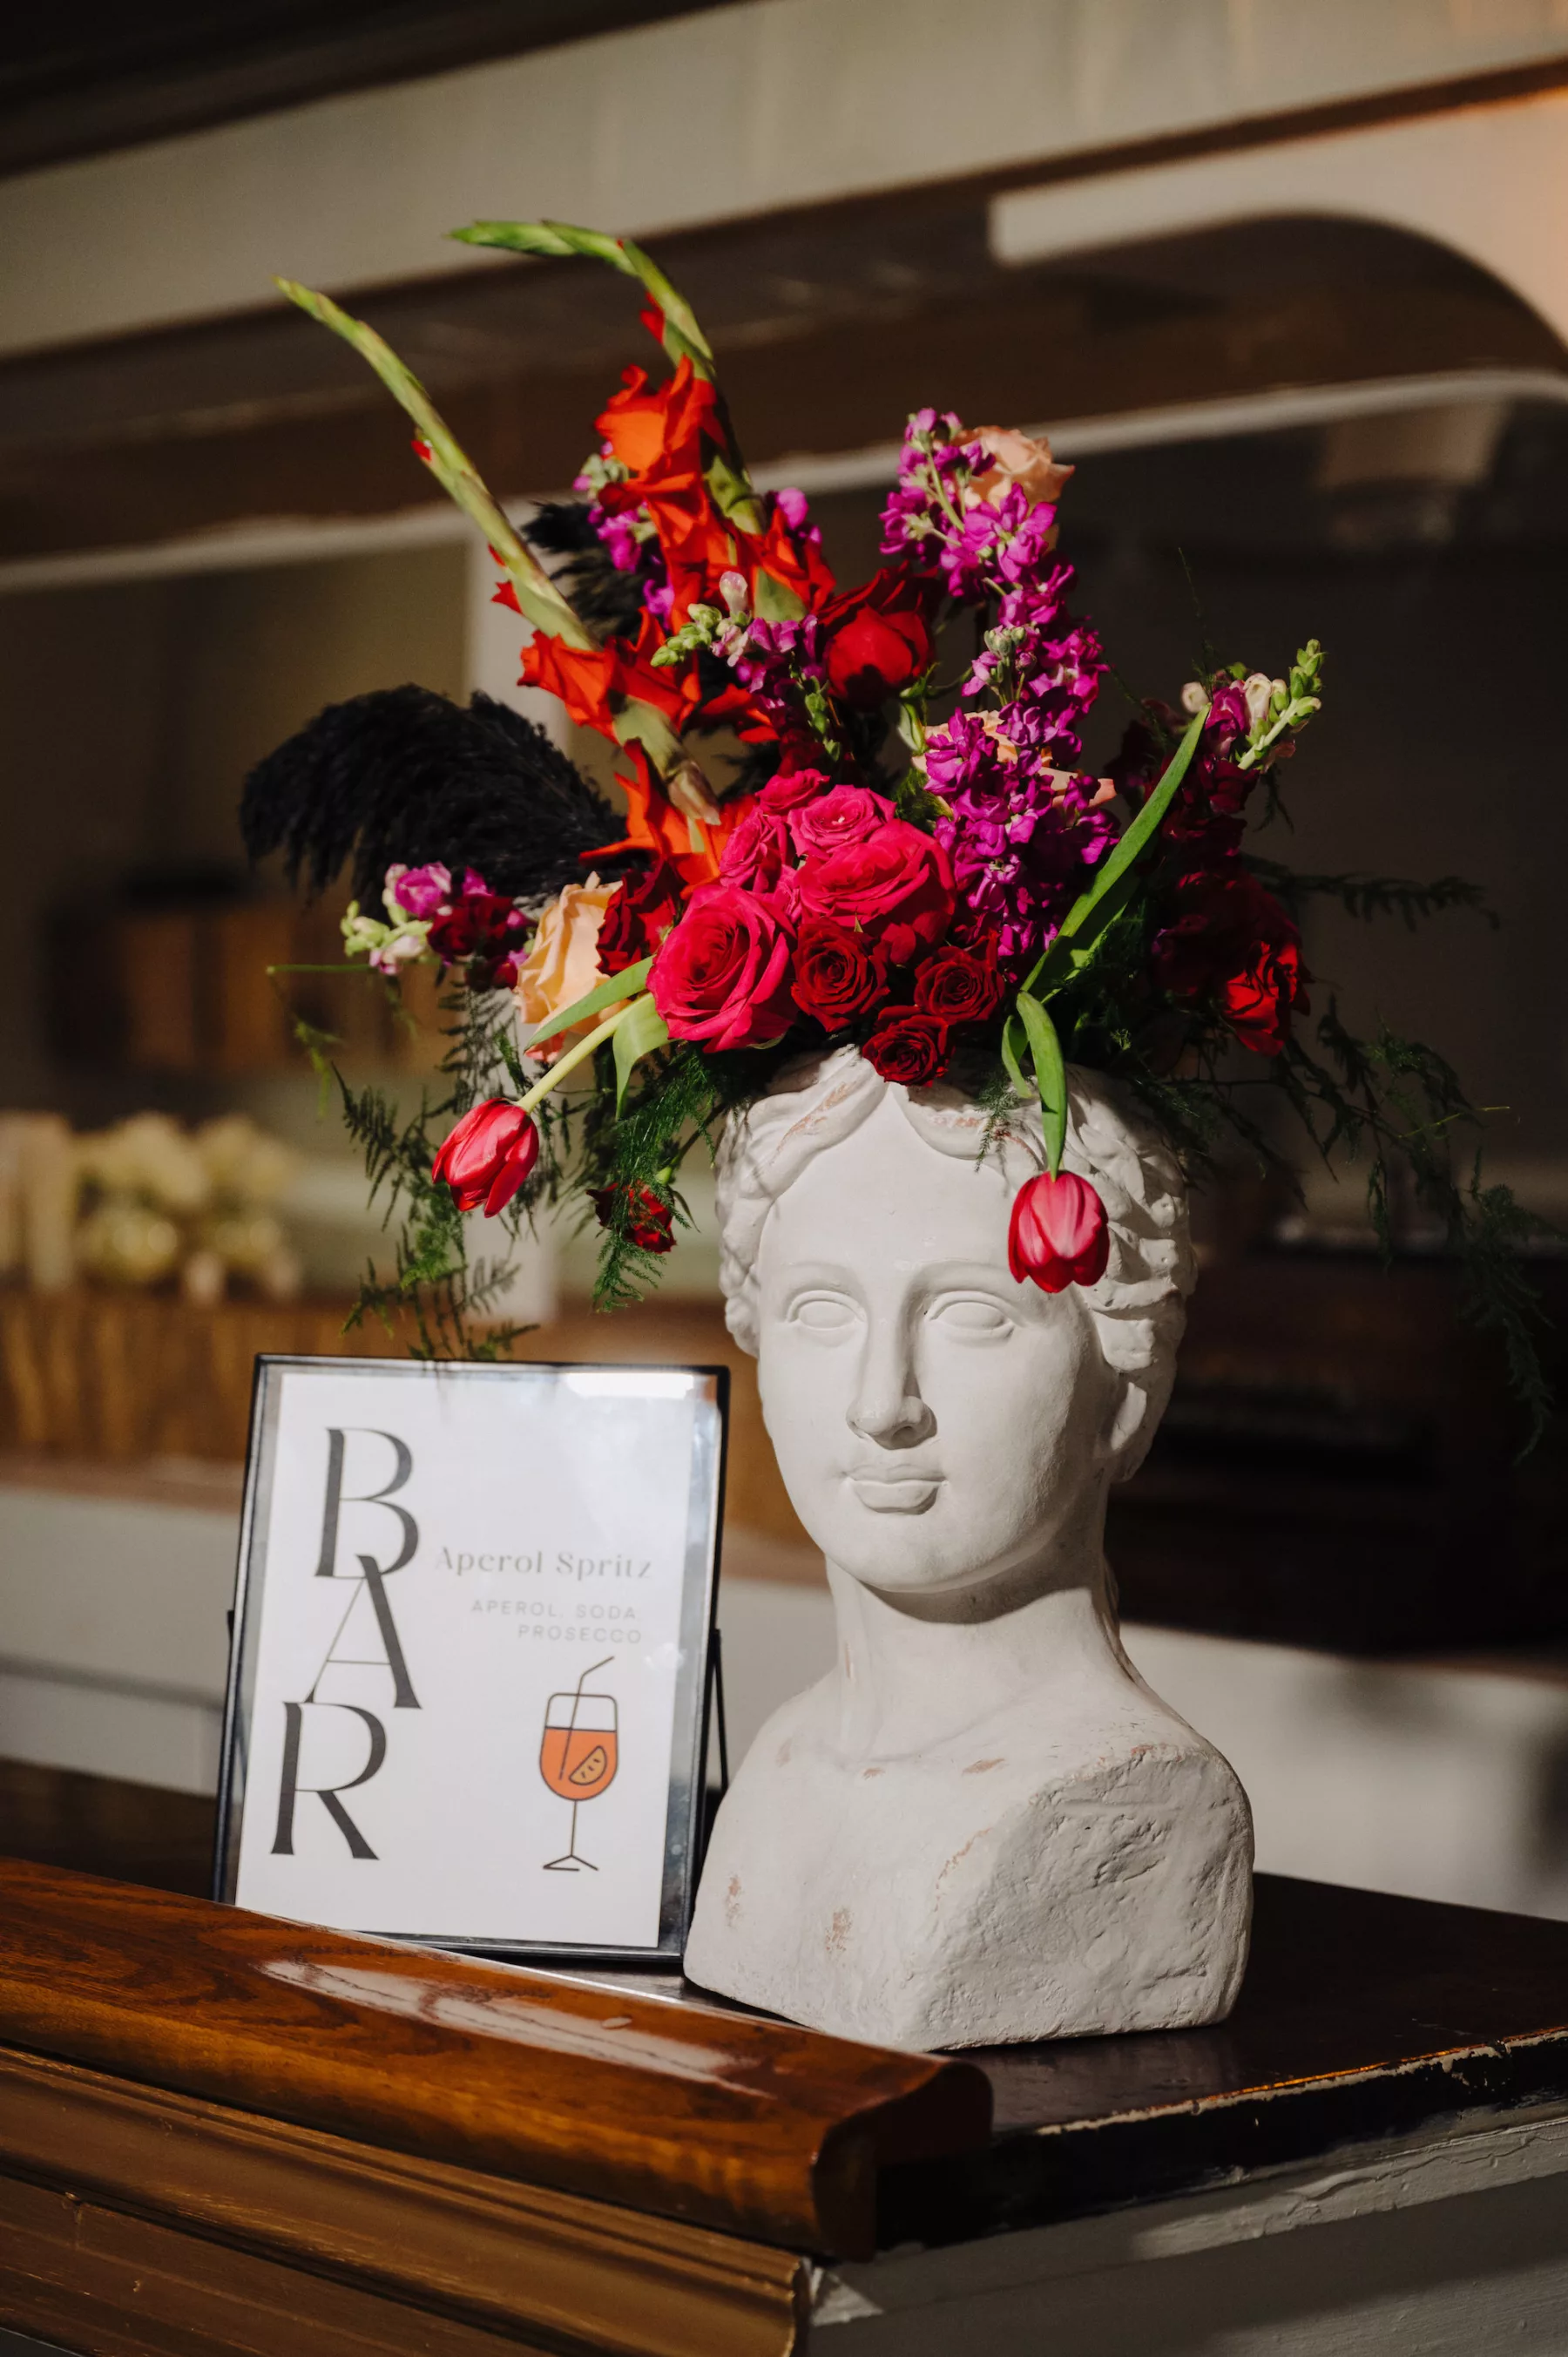 Modern Wedding Reception Bar Decor Ideas | Bust with Pink and Red Roses, Black Pampas Grass, and Greenery Flower Arrangement Inspiration | Tampa Bay Florist Save The Date Florida